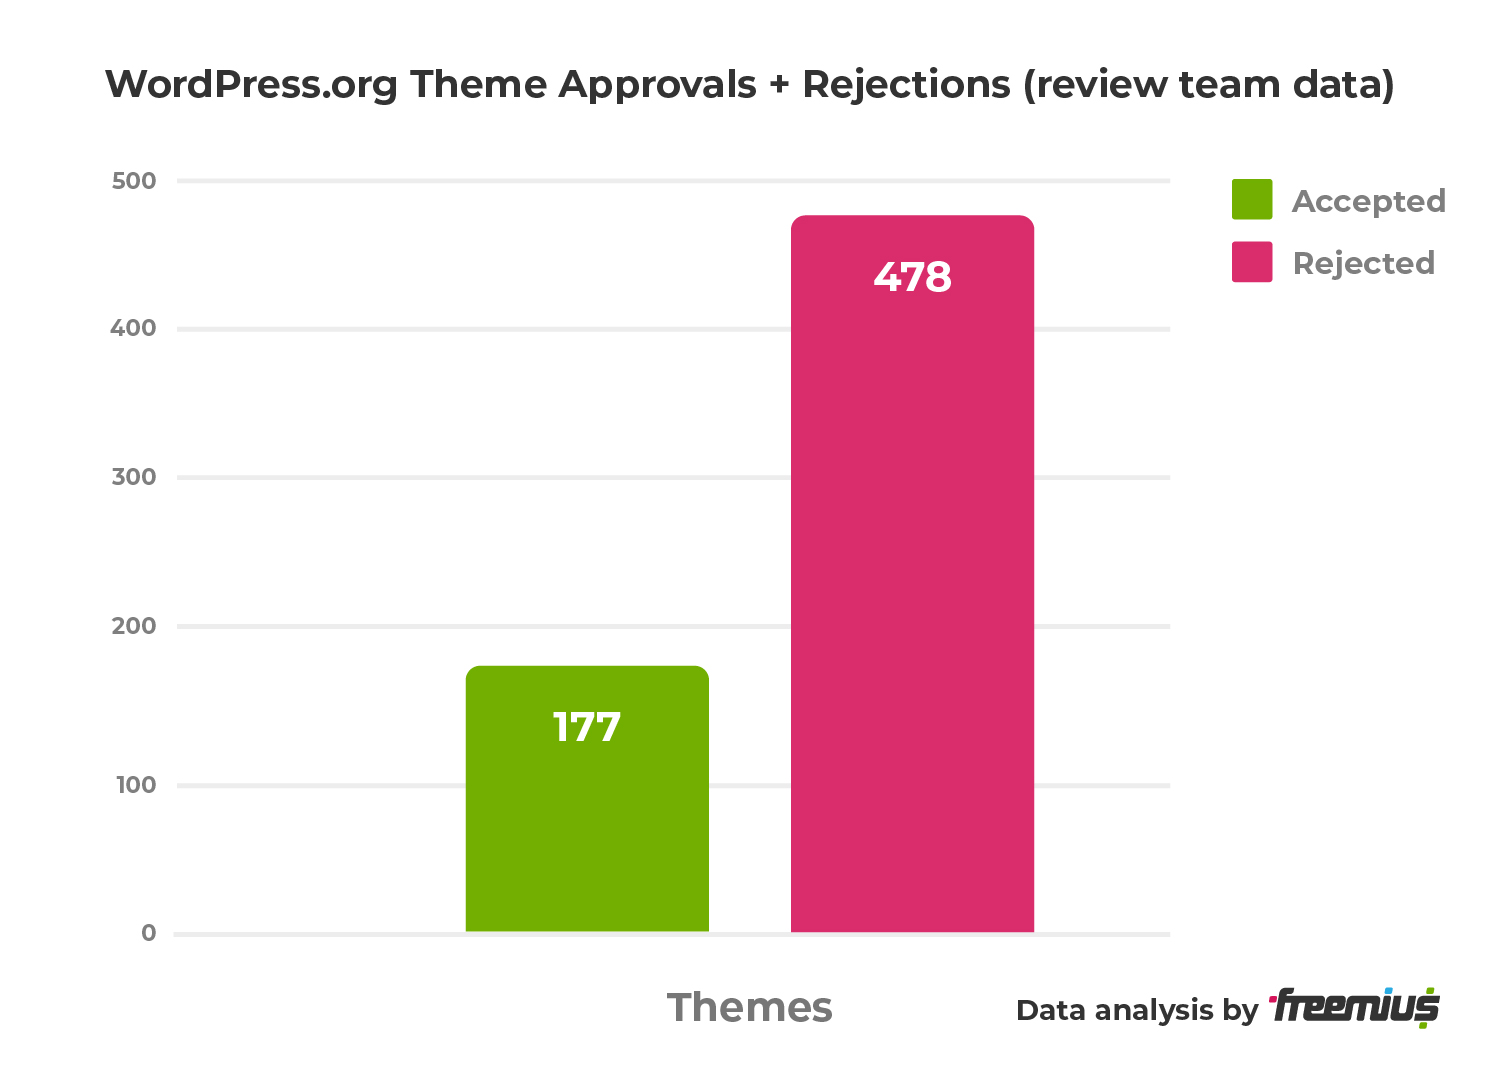 WordPress.org Theme Approvals and Rejections - theme review team data